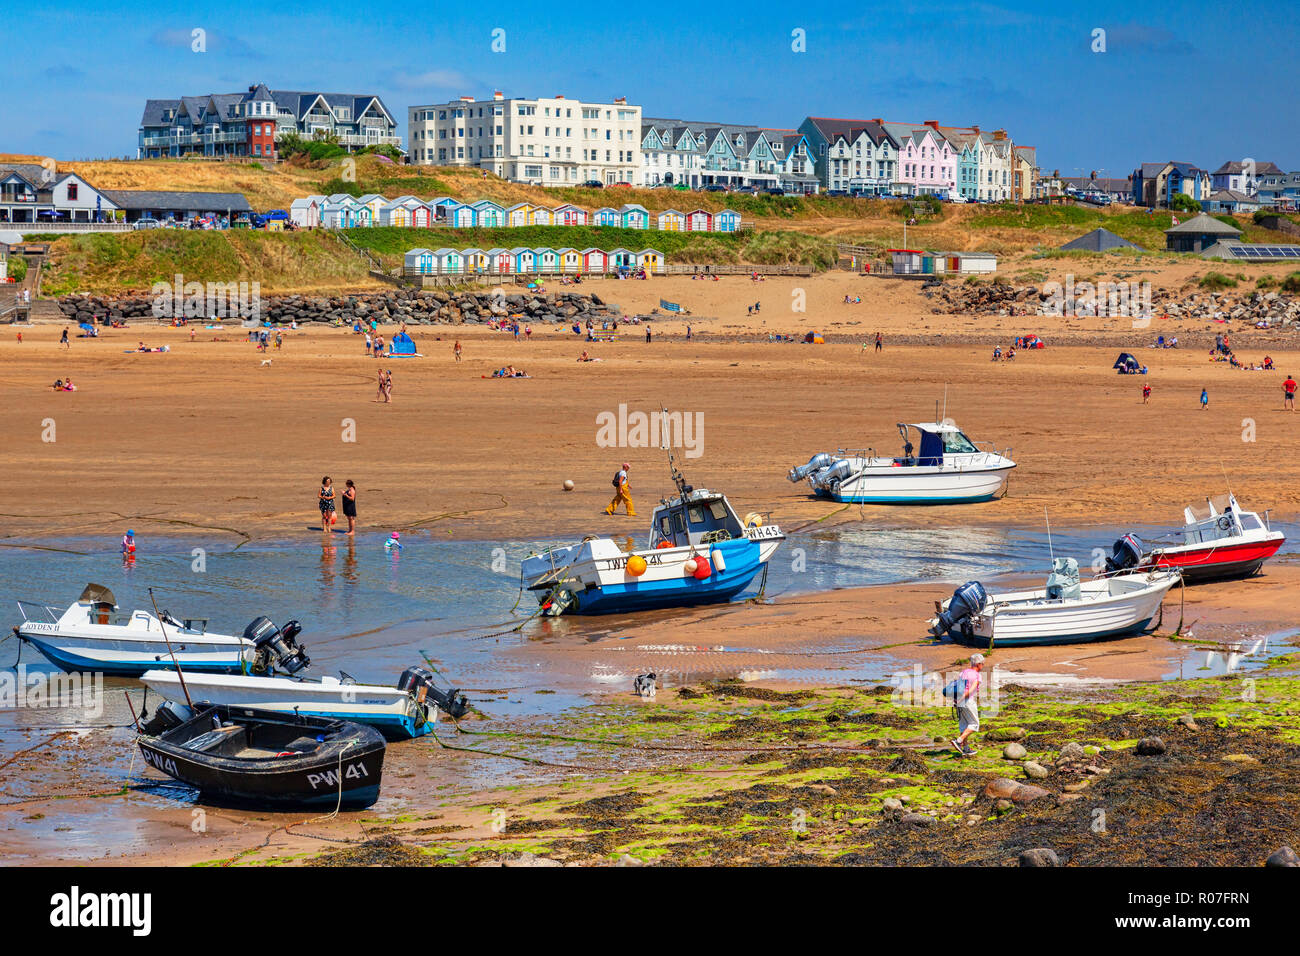 6 July 2018: Bude, Cornwall, UK - The beach during the summer heatwave, at low tide. Stock Photo